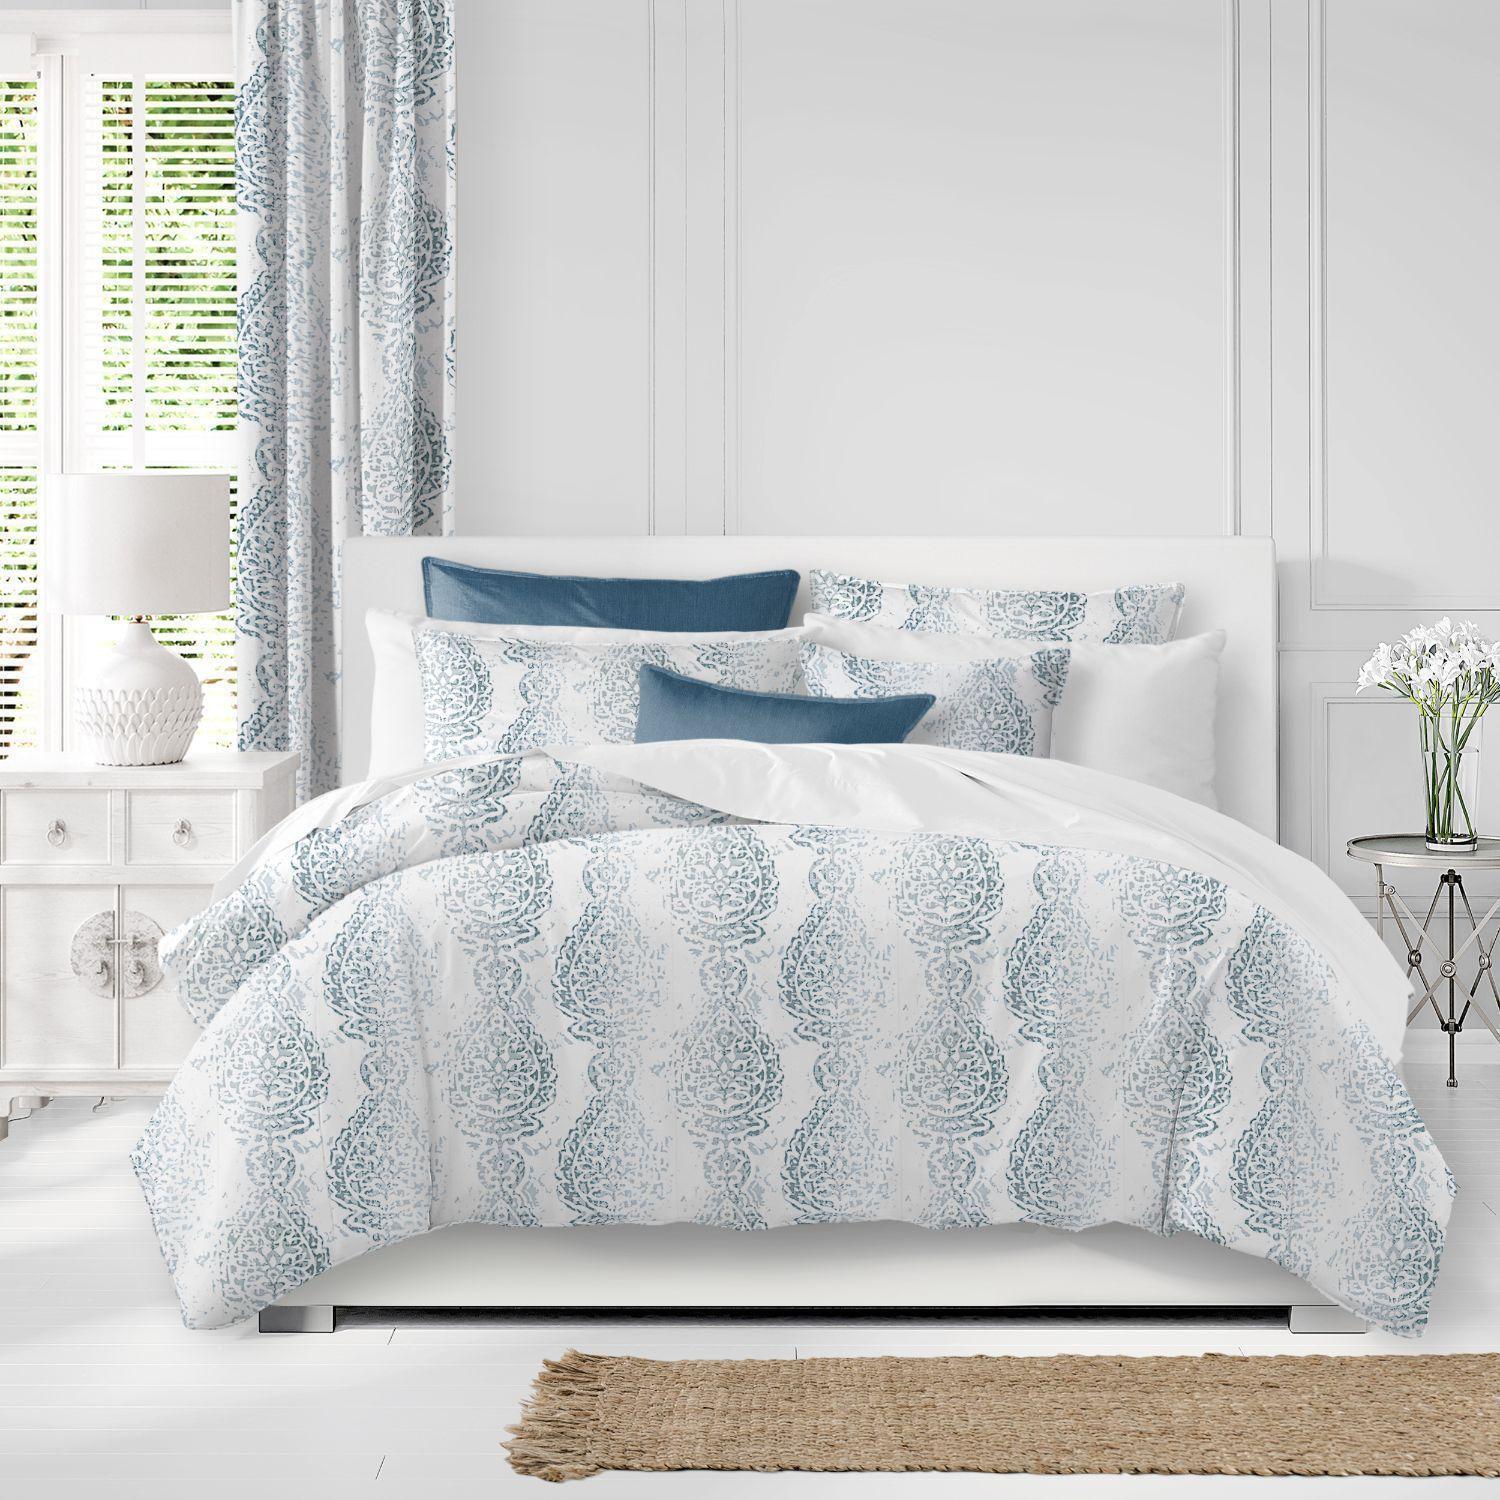 Set of 3 White and Blue Distressed Paisley Comforter with Pillow Shams - King